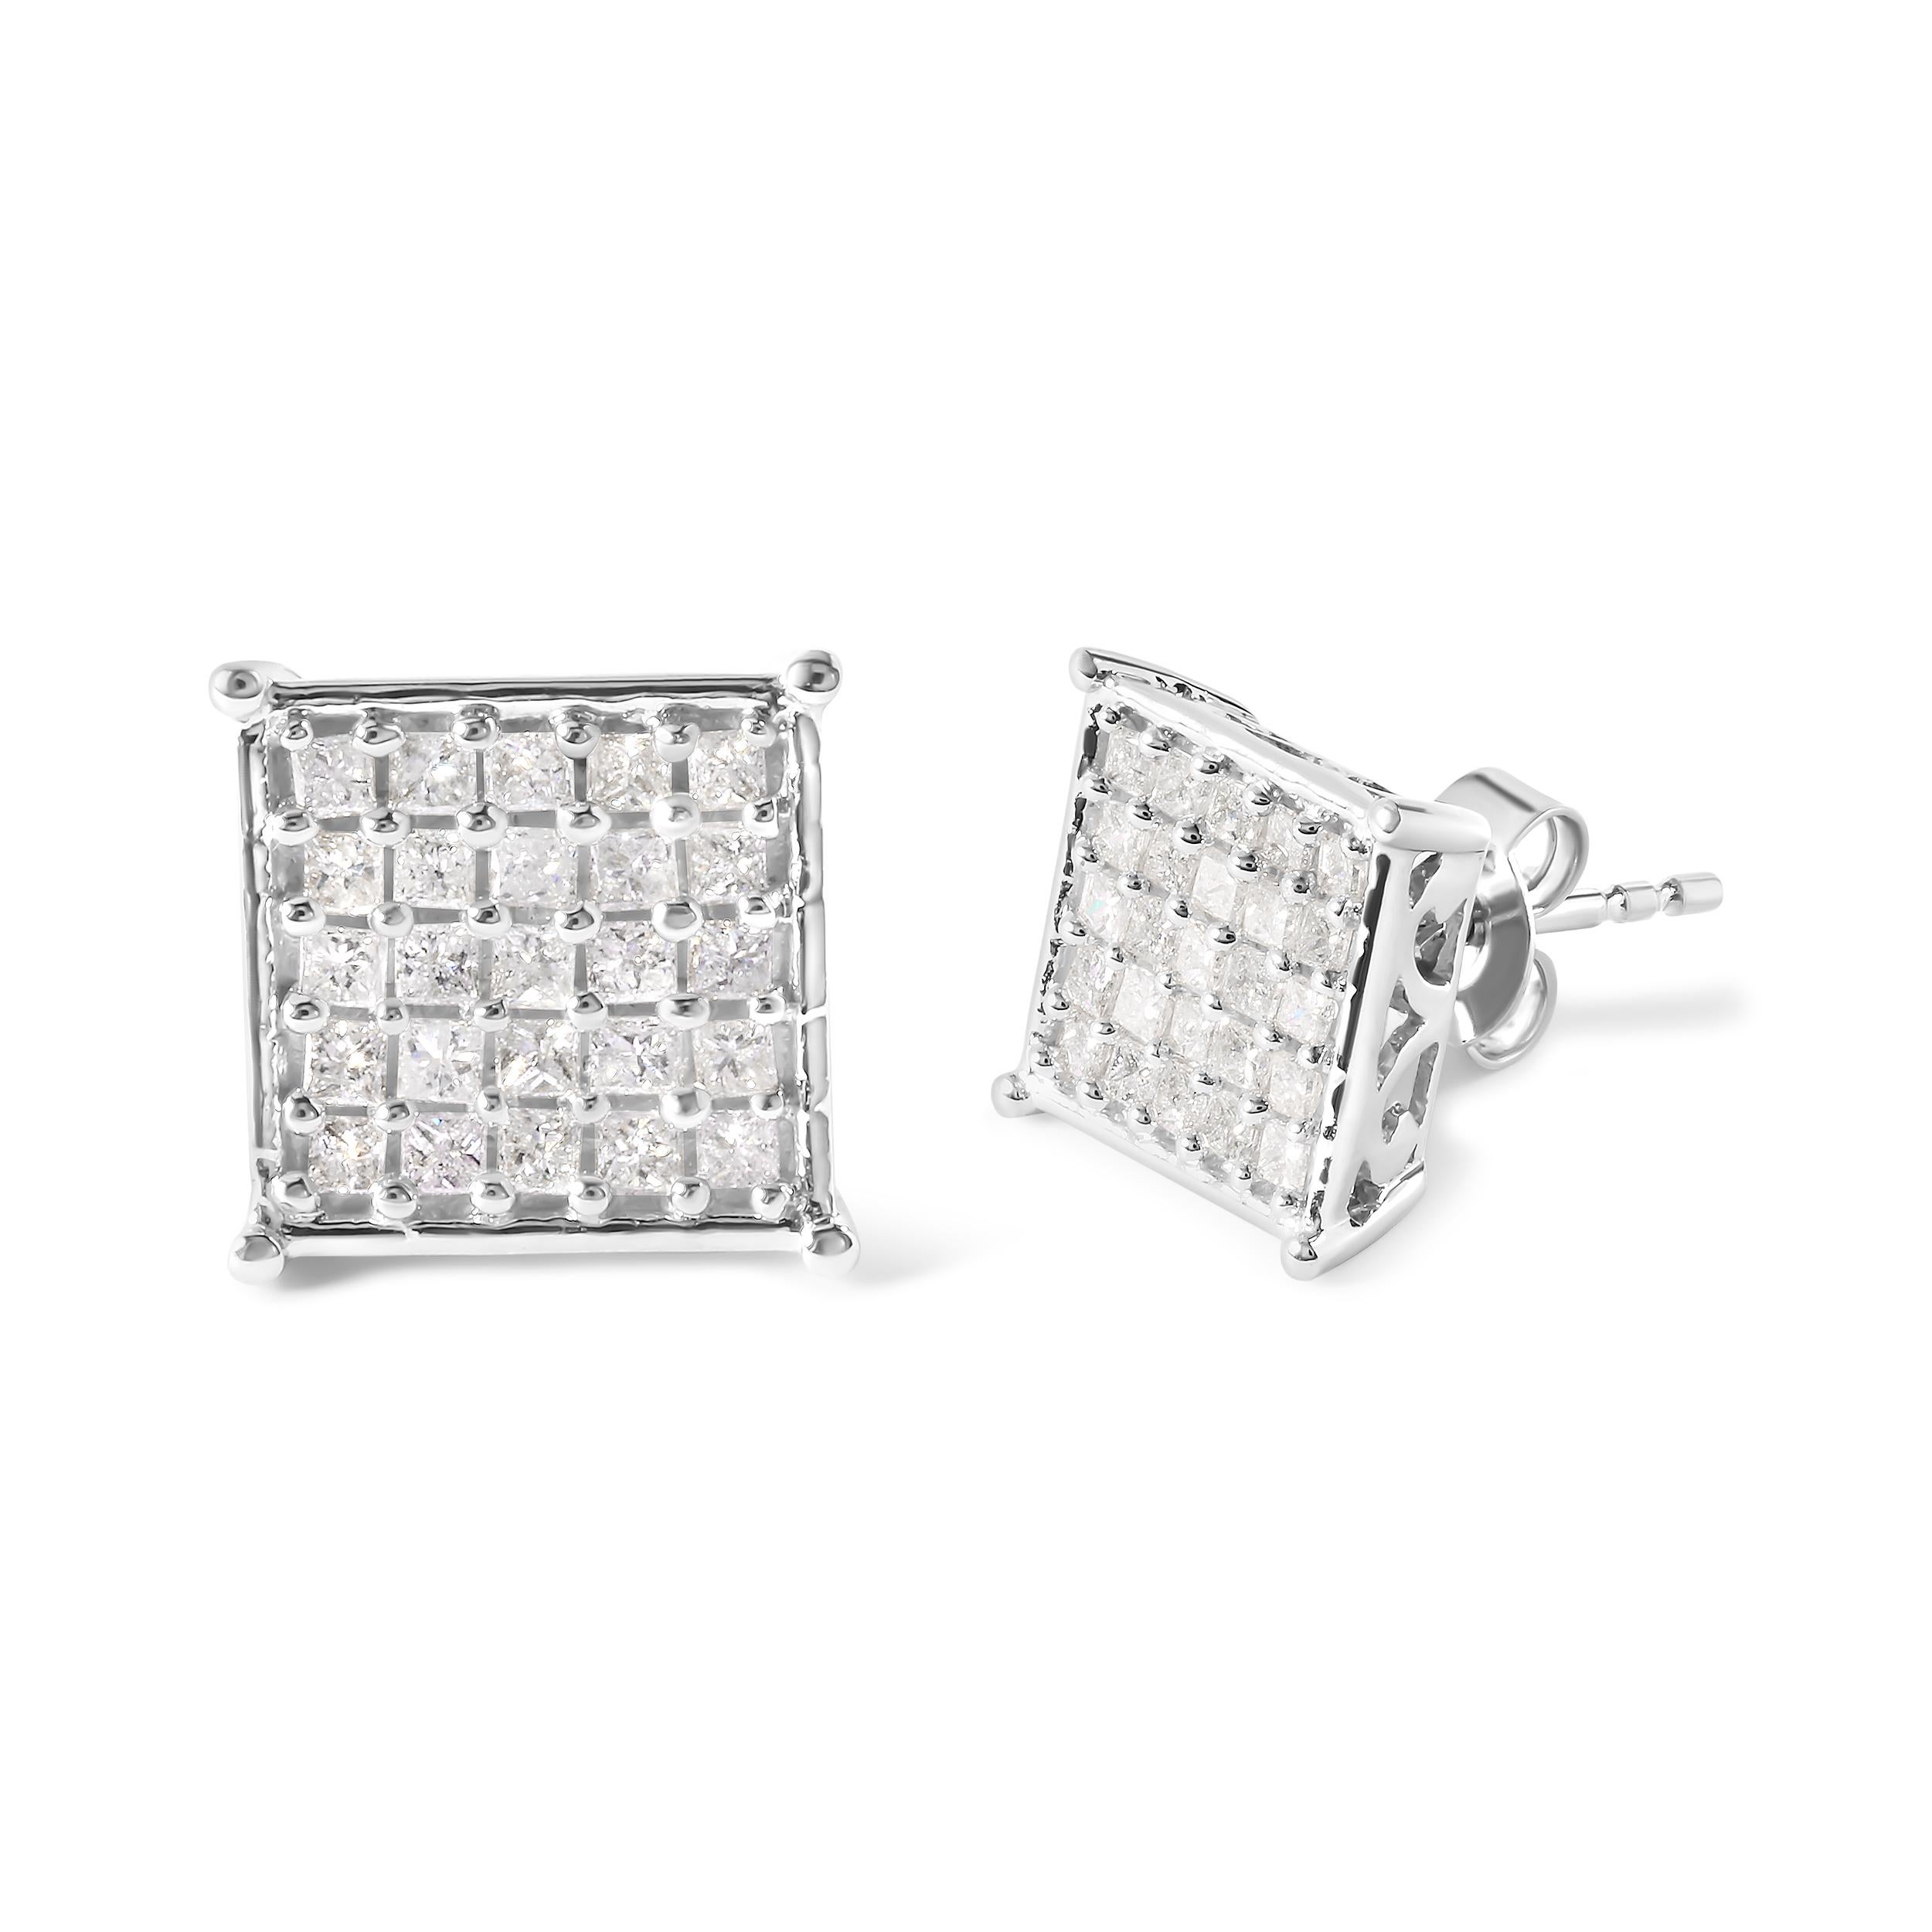 Indulge in the timeless elegance of these stunning diamond composite stud earrings, crafted from 10K white gold. With a total of 50 natural princess-cut diamonds, these earrings boast a substantial 3/4 cttw, ensuring you'll sparkle from every angle.